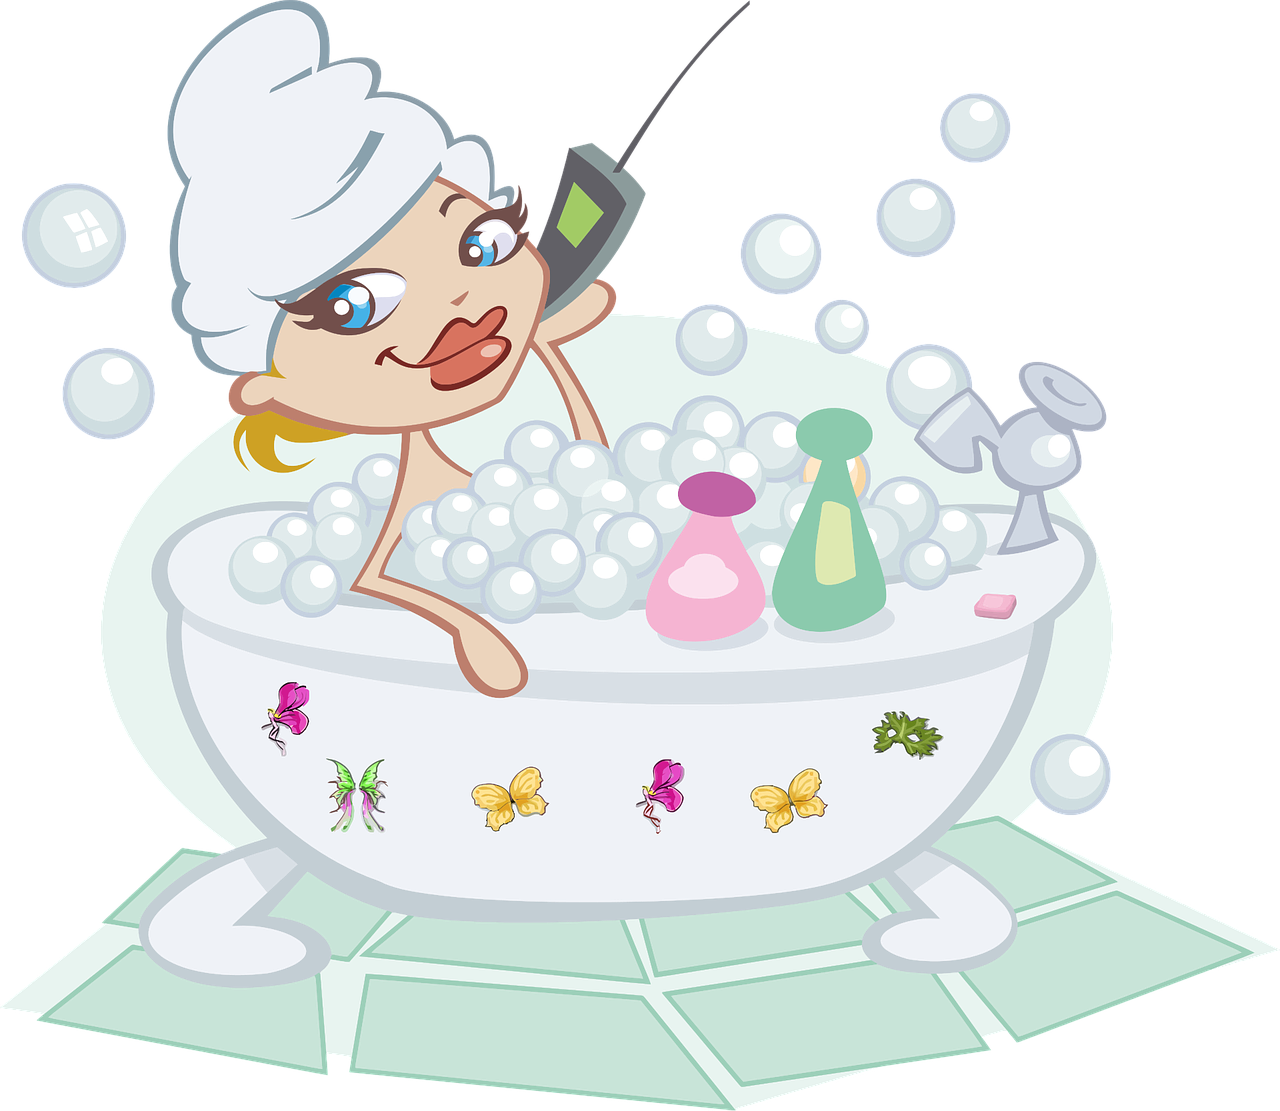 Bath Safety: how to use essential oils safely in the bath.